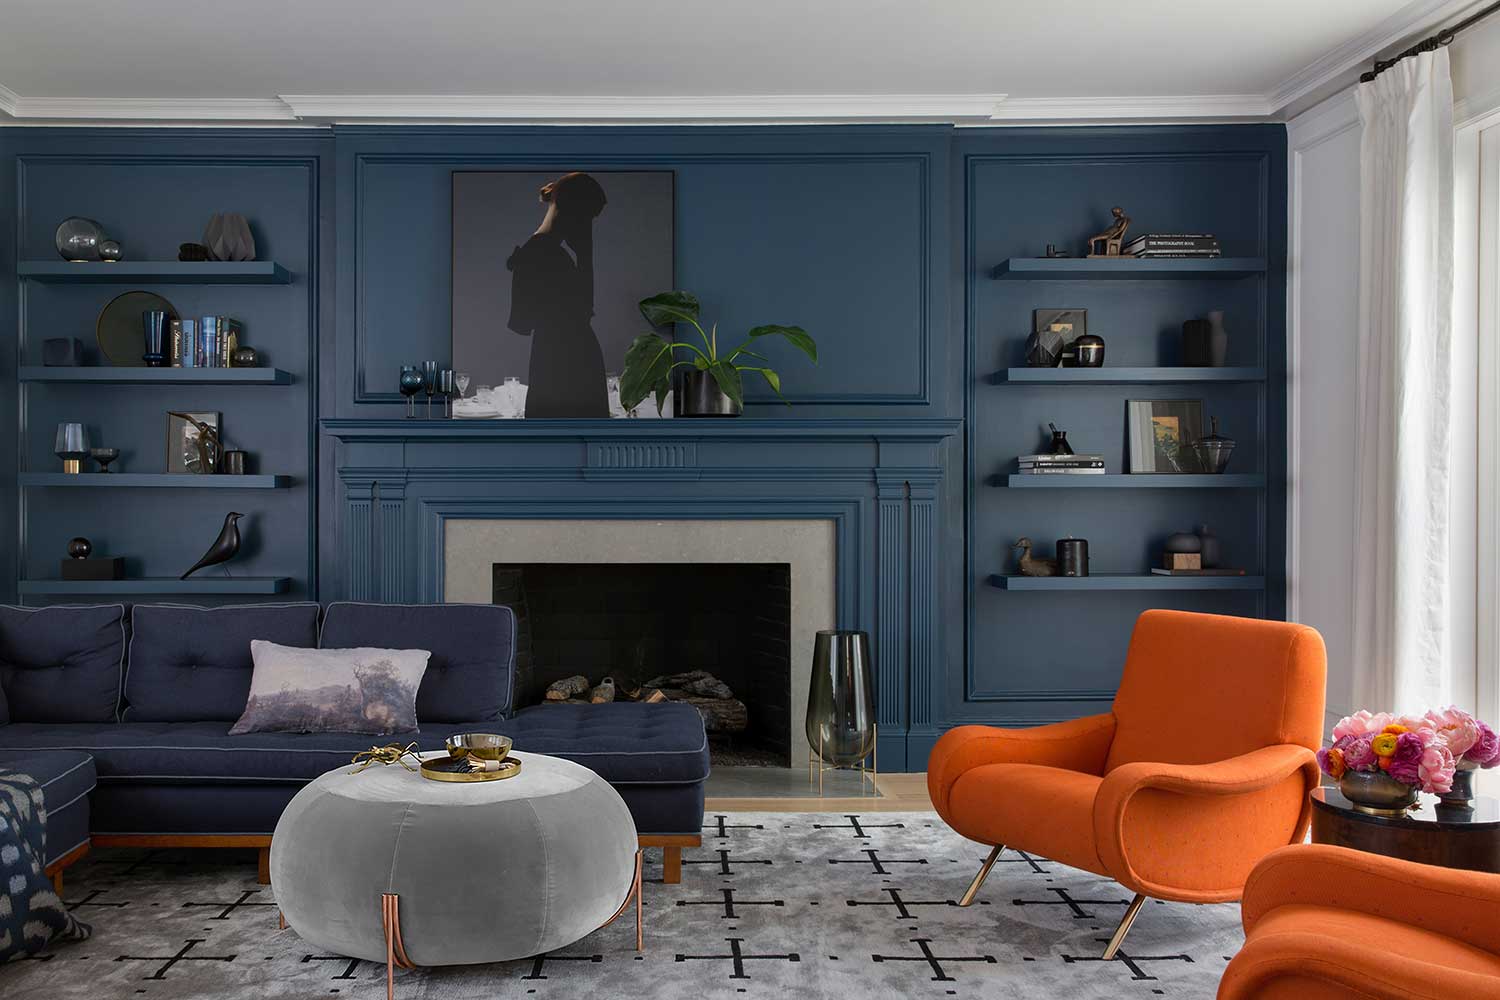 Top moody paint color Benjamin Moore's Gentleman's Grey cloaks a living room with fireplace and orange accent chairs